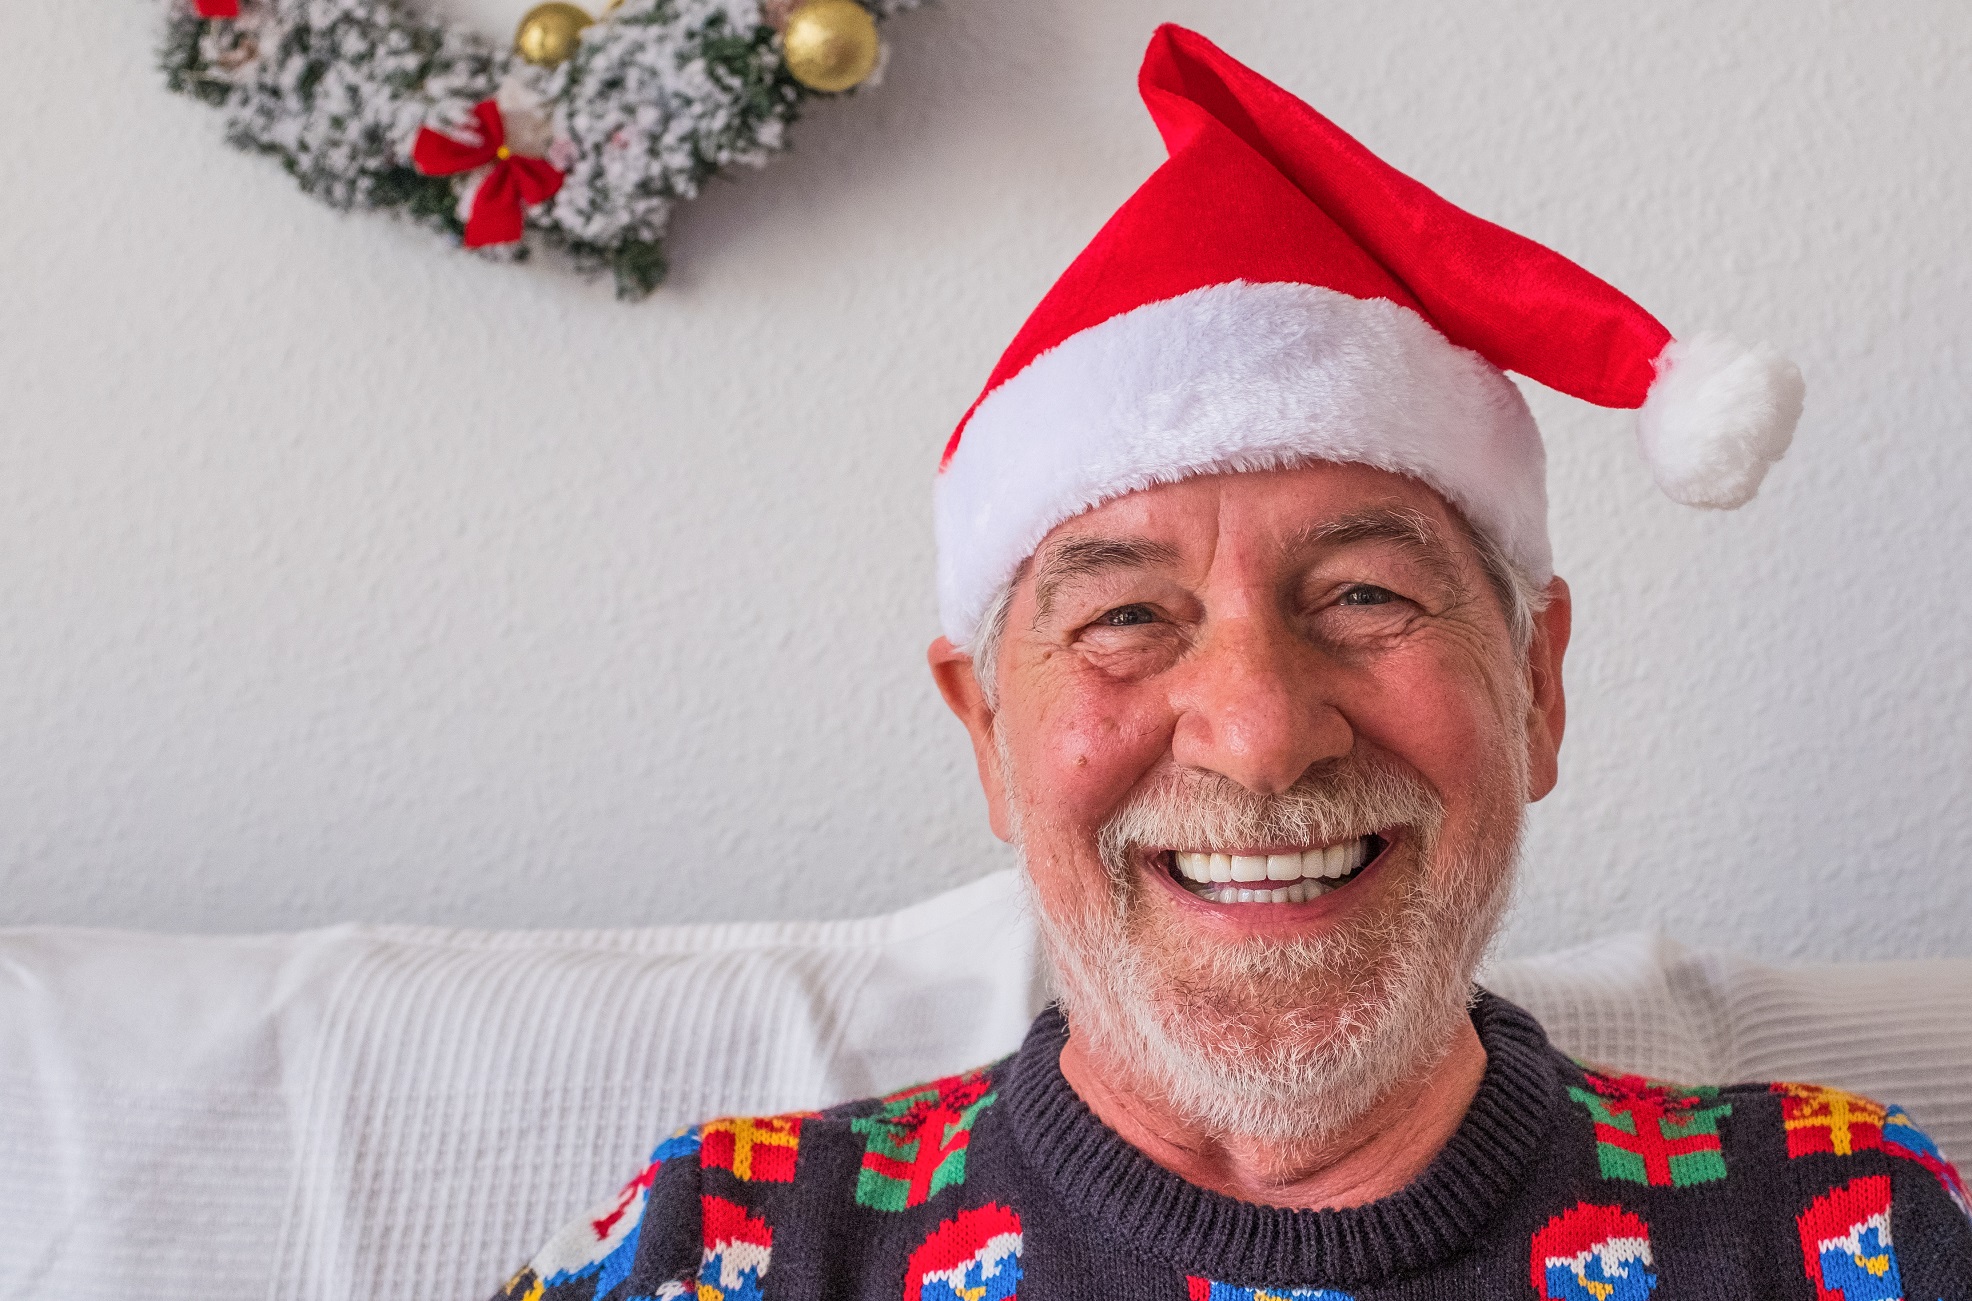 Alabare Christmas man smiling at home homeless, rough sleepers, homeless veterans, learning disabilities, drop-in homeless service